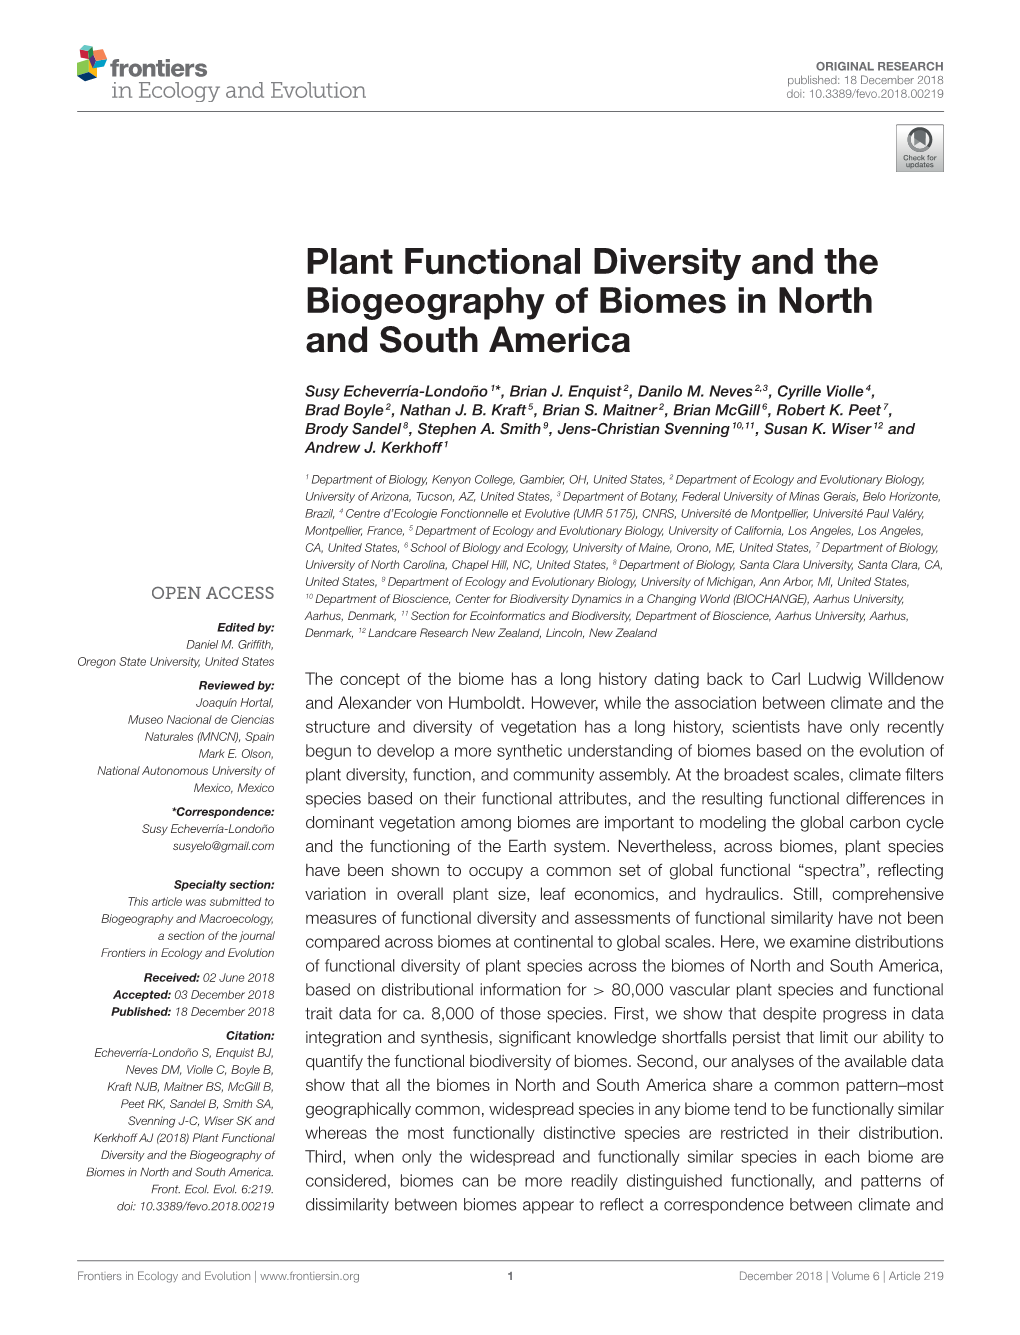 Plant Functional Diversity and the Biogeography of Biomes in North and South America